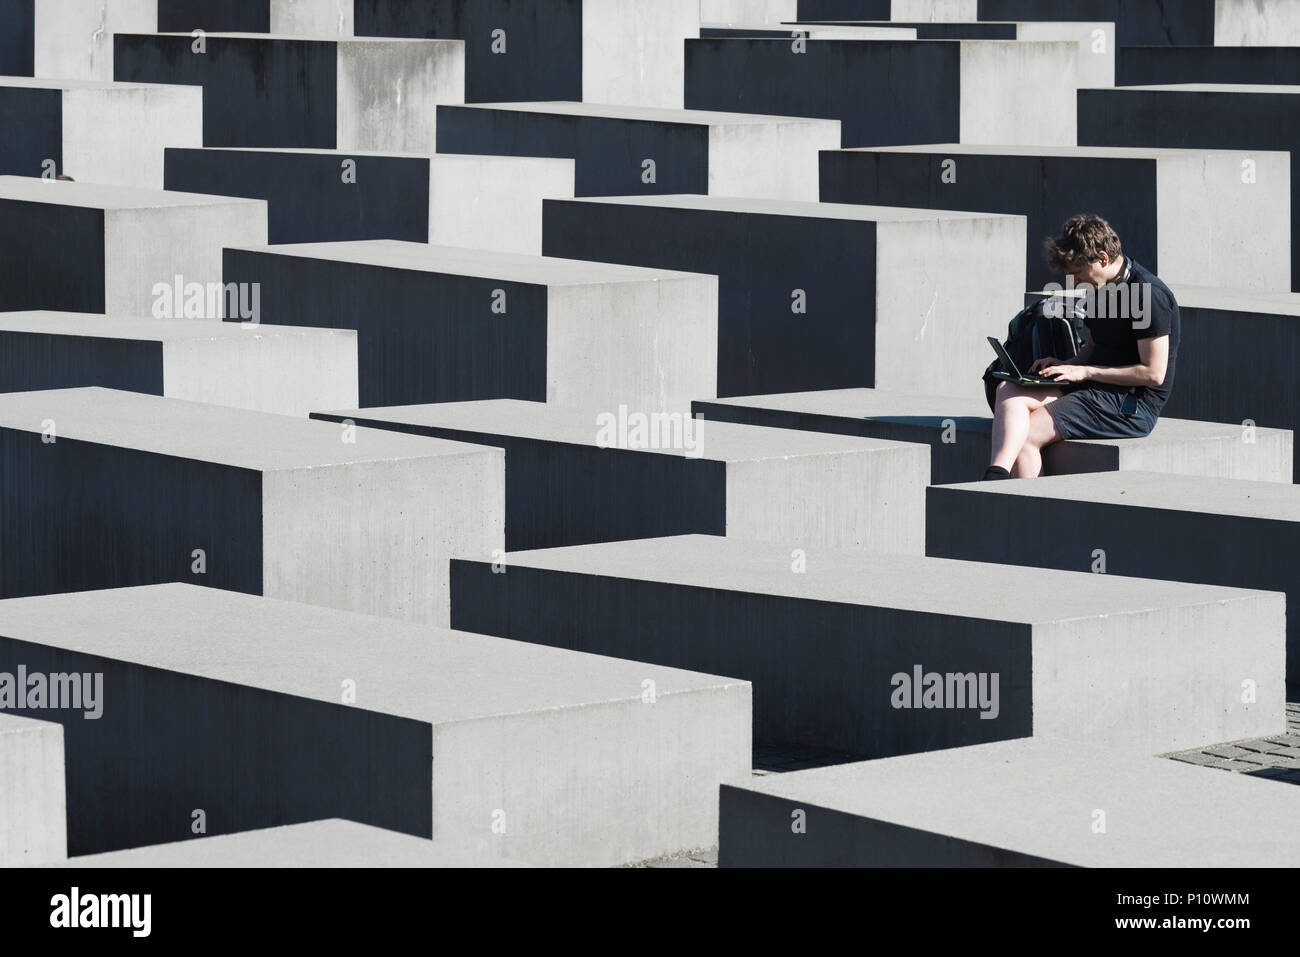 White man is typing on laptop and sitting on a block of Holocaust Memorial, Berlin, Germany Stock Photo